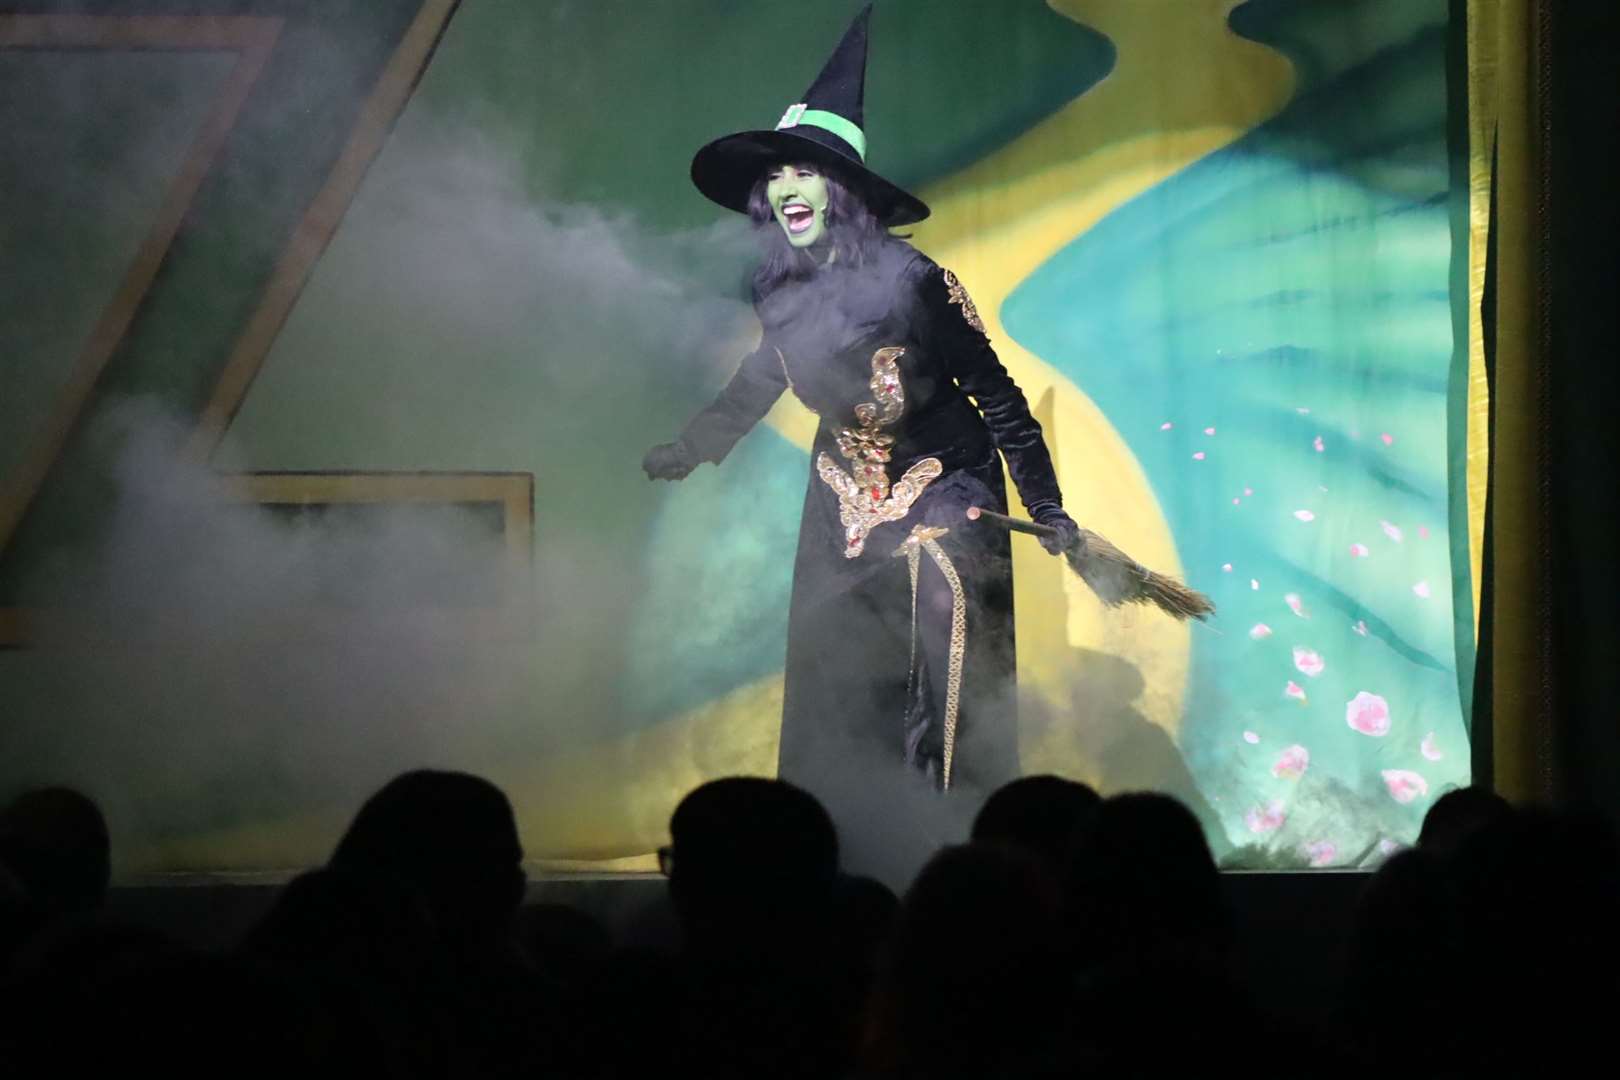 Wicked Witch of the West Soheila Clifford in the Wizard of Oz at Swallows Leisure Centre, Sittingbourne (24320954)